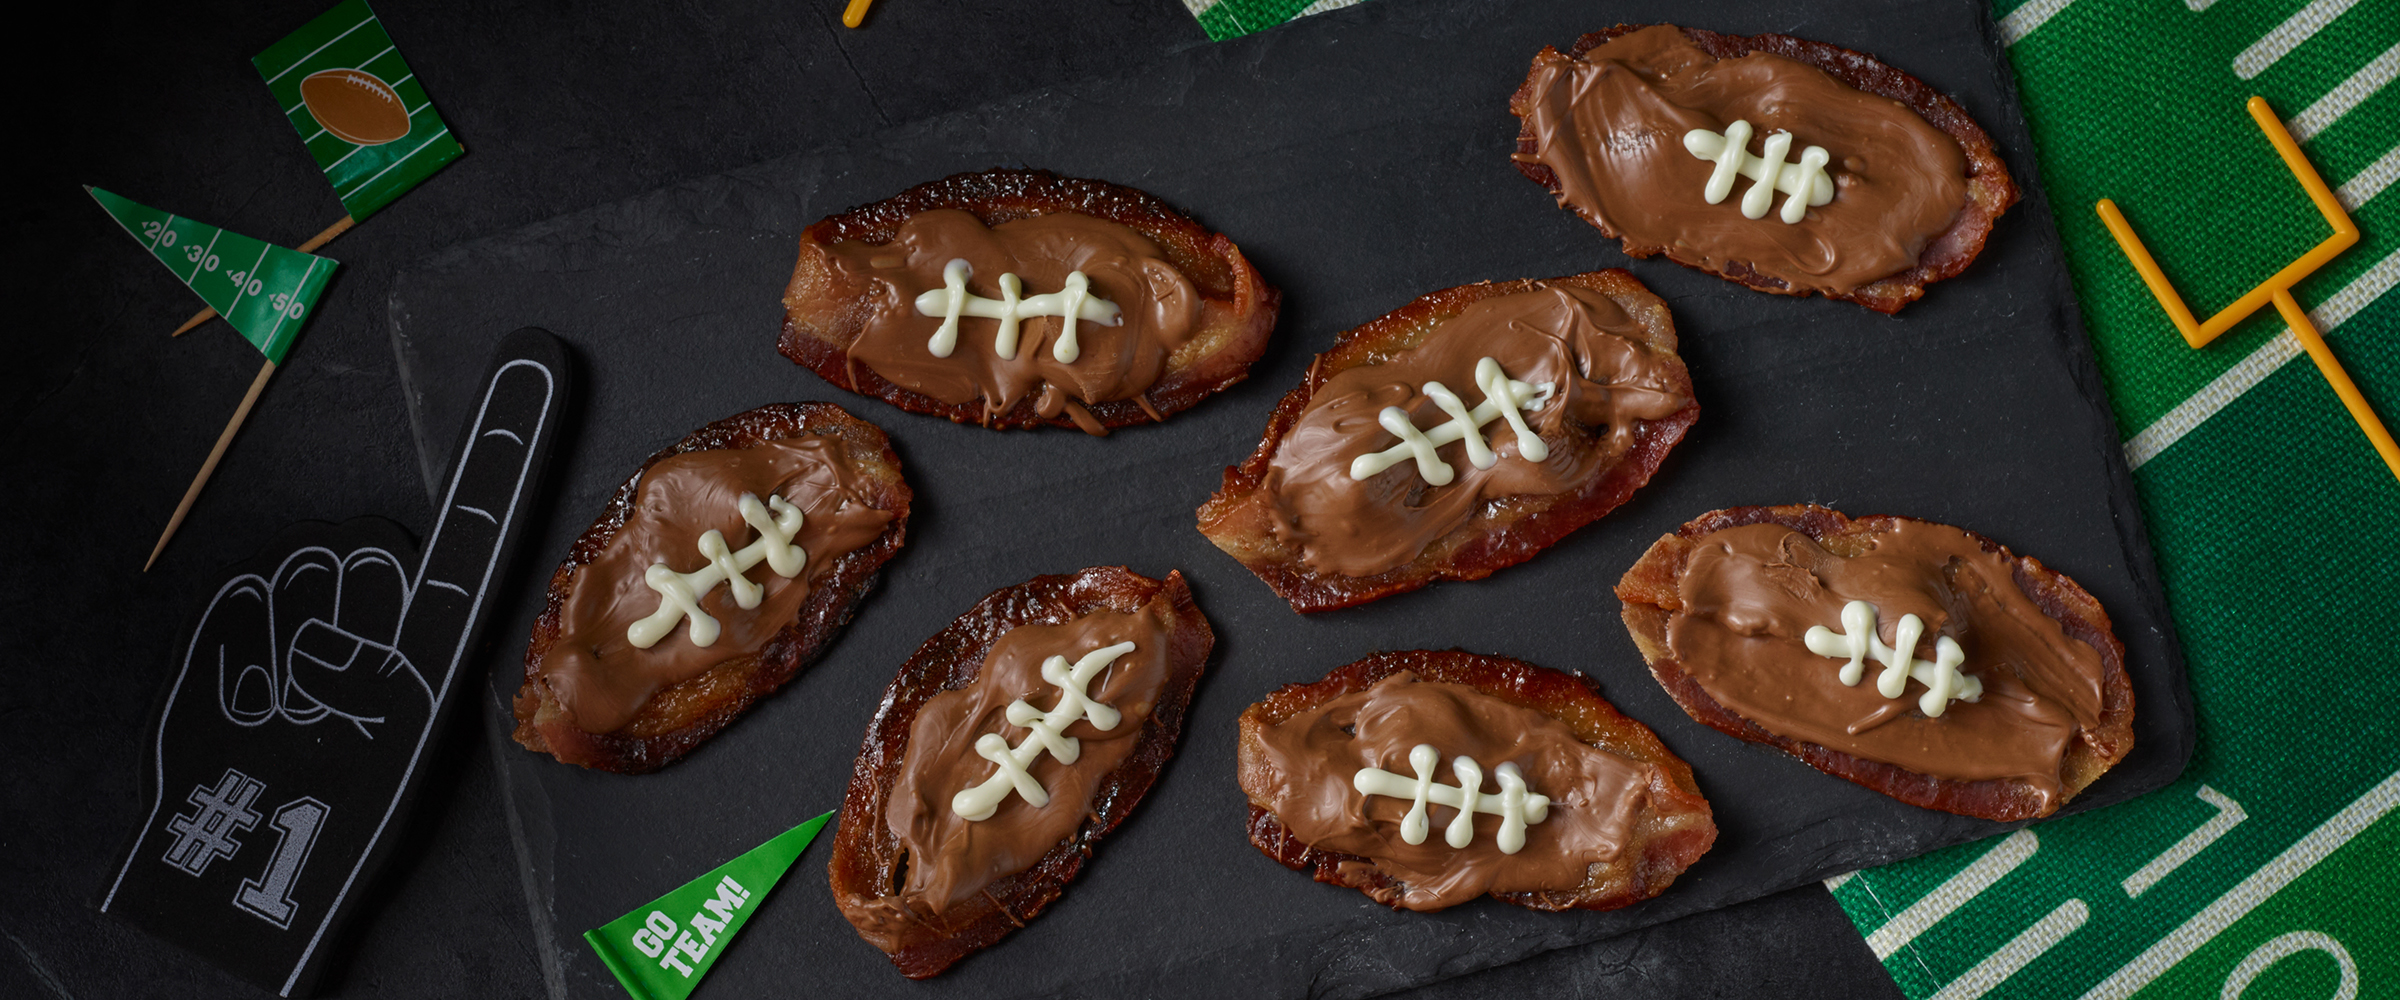 Chocolate covered bacon in the shape of footballs with white chocolate icing for the laces